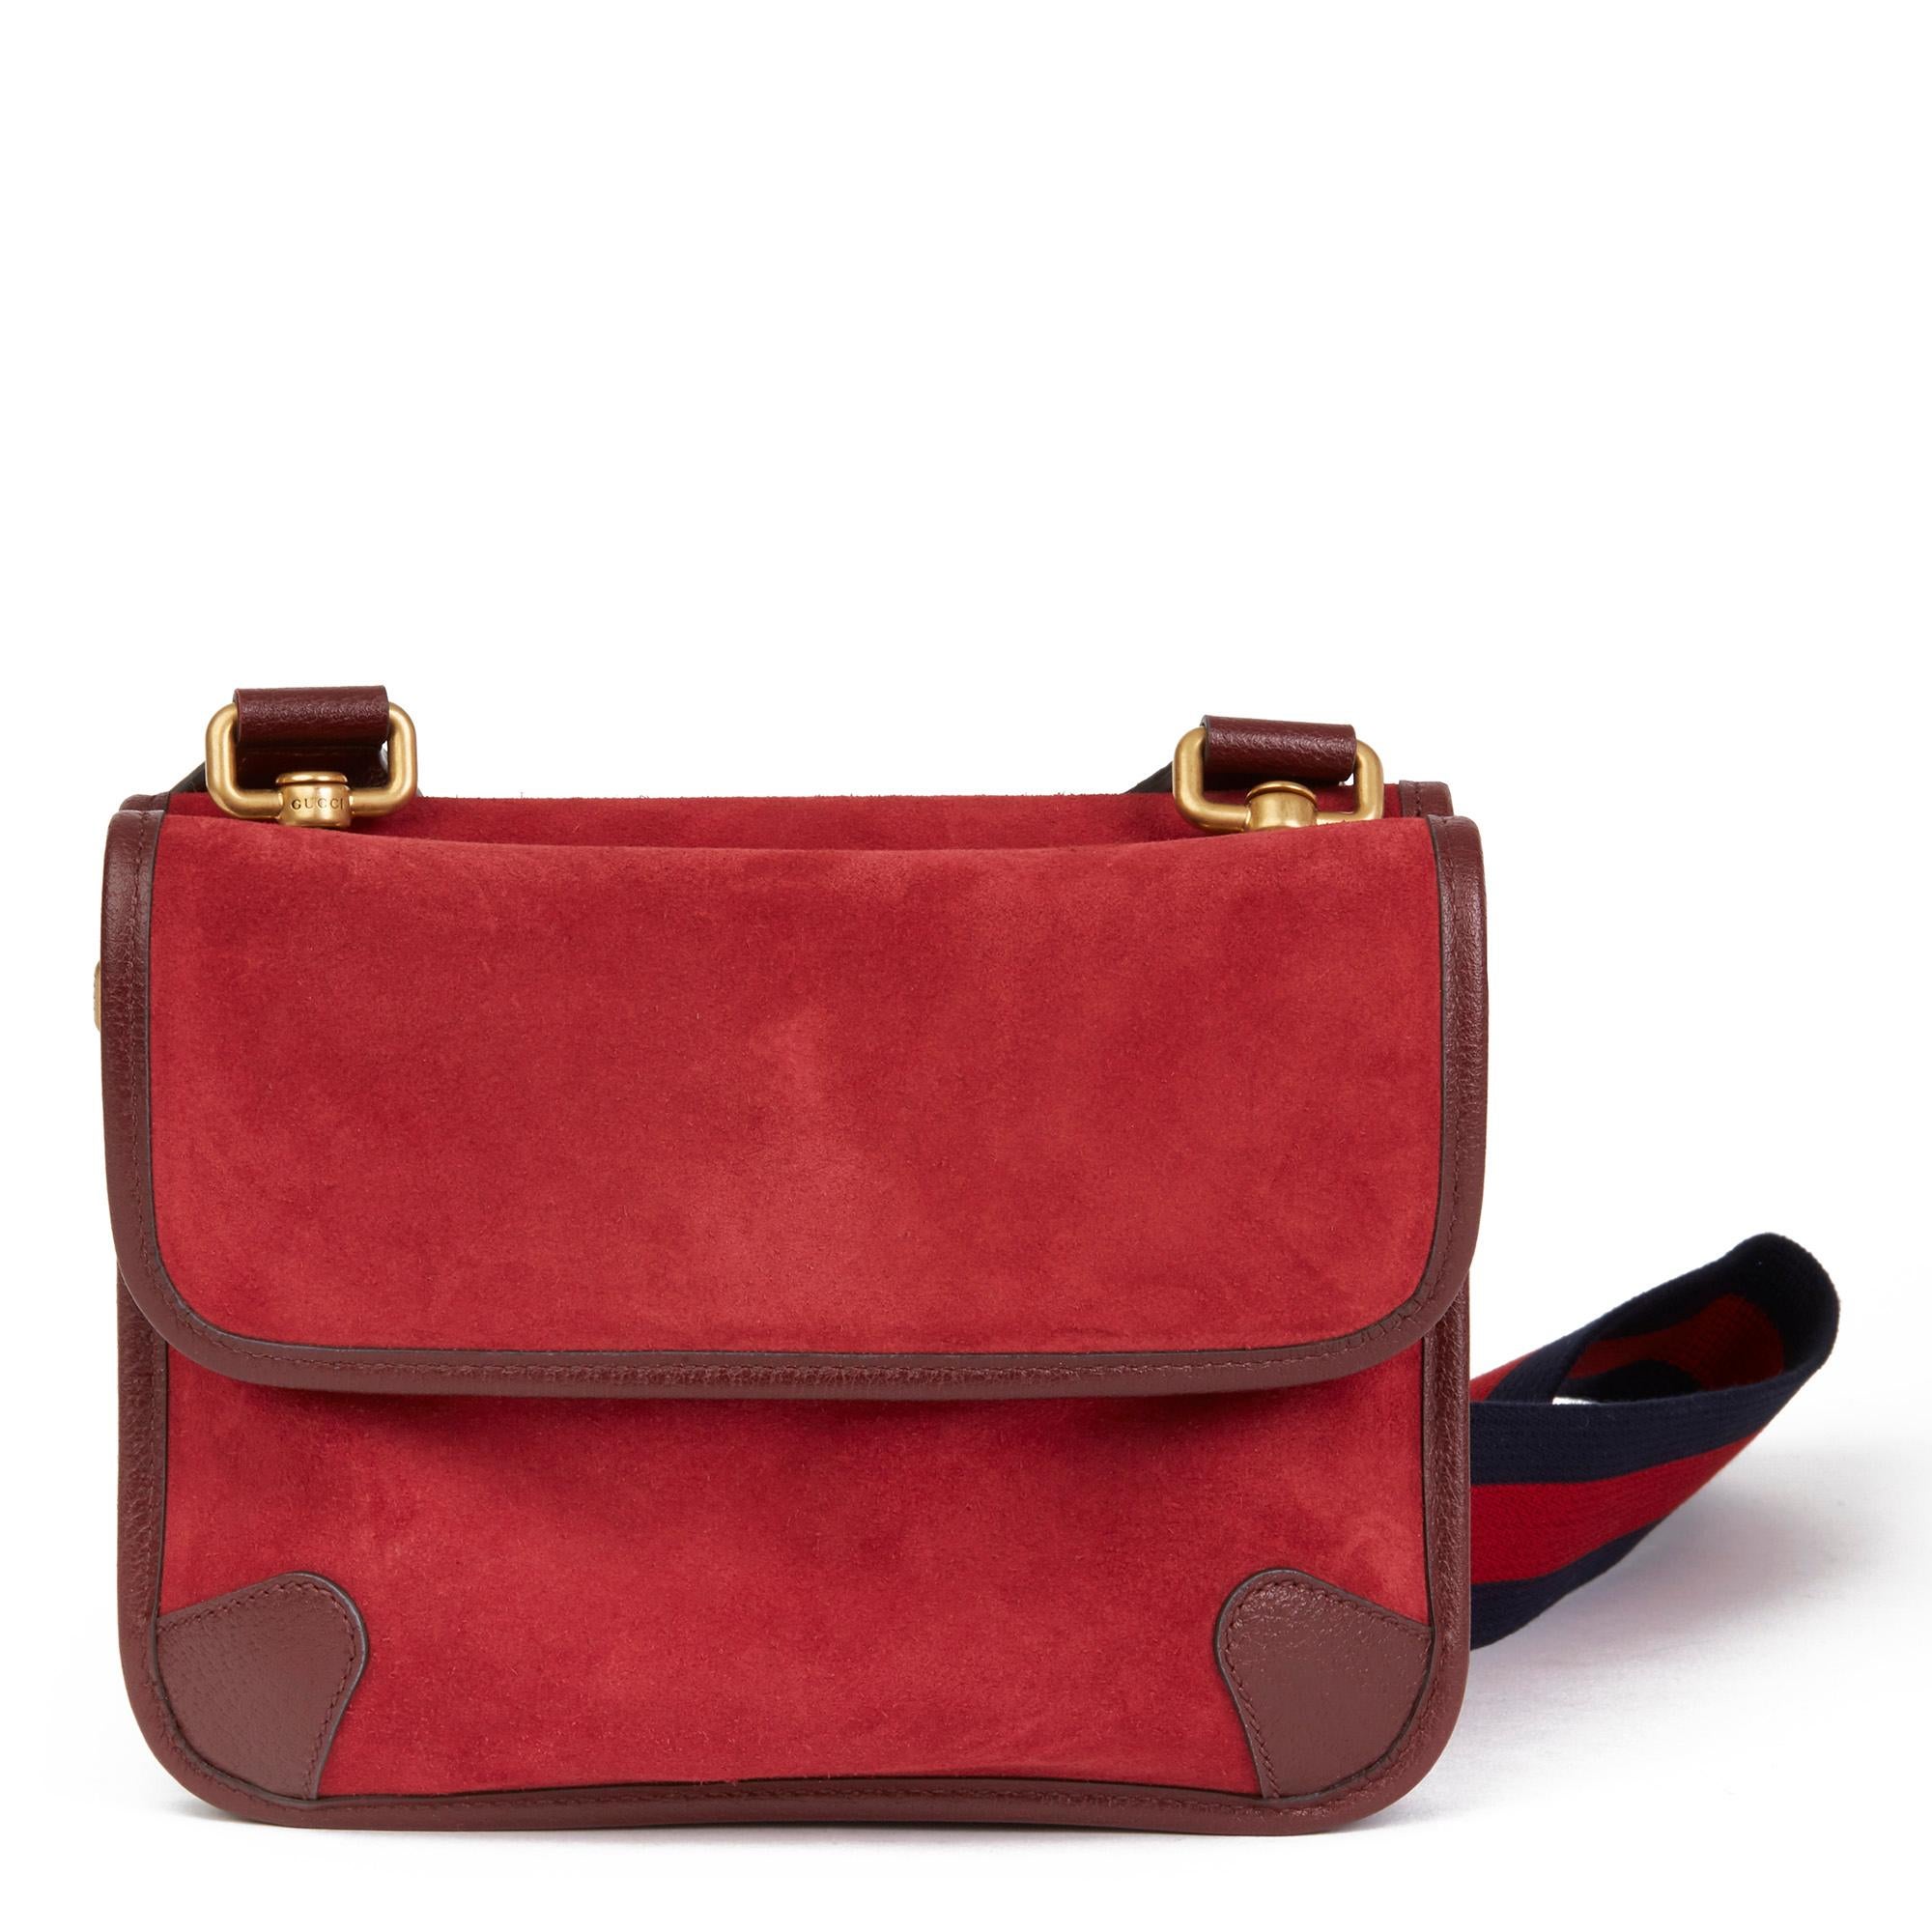 Women's or Men's 2020 Gucci Red Suede & Burgundy Pigskin, Navy Web Small Messenger Bag